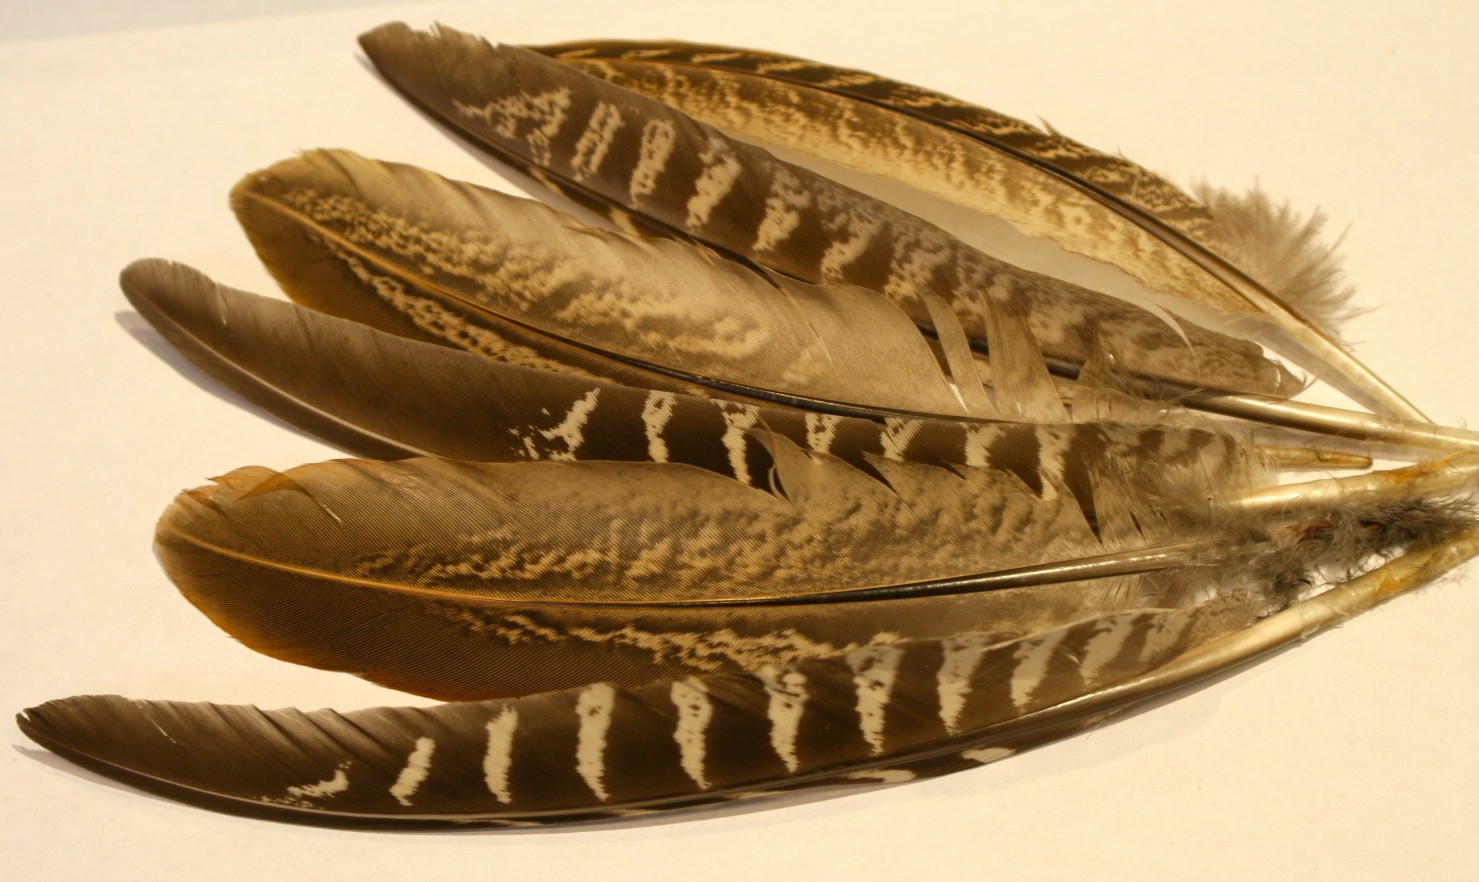 bag of hen pheasant wing feathers - Pheasant Feathers & Skins